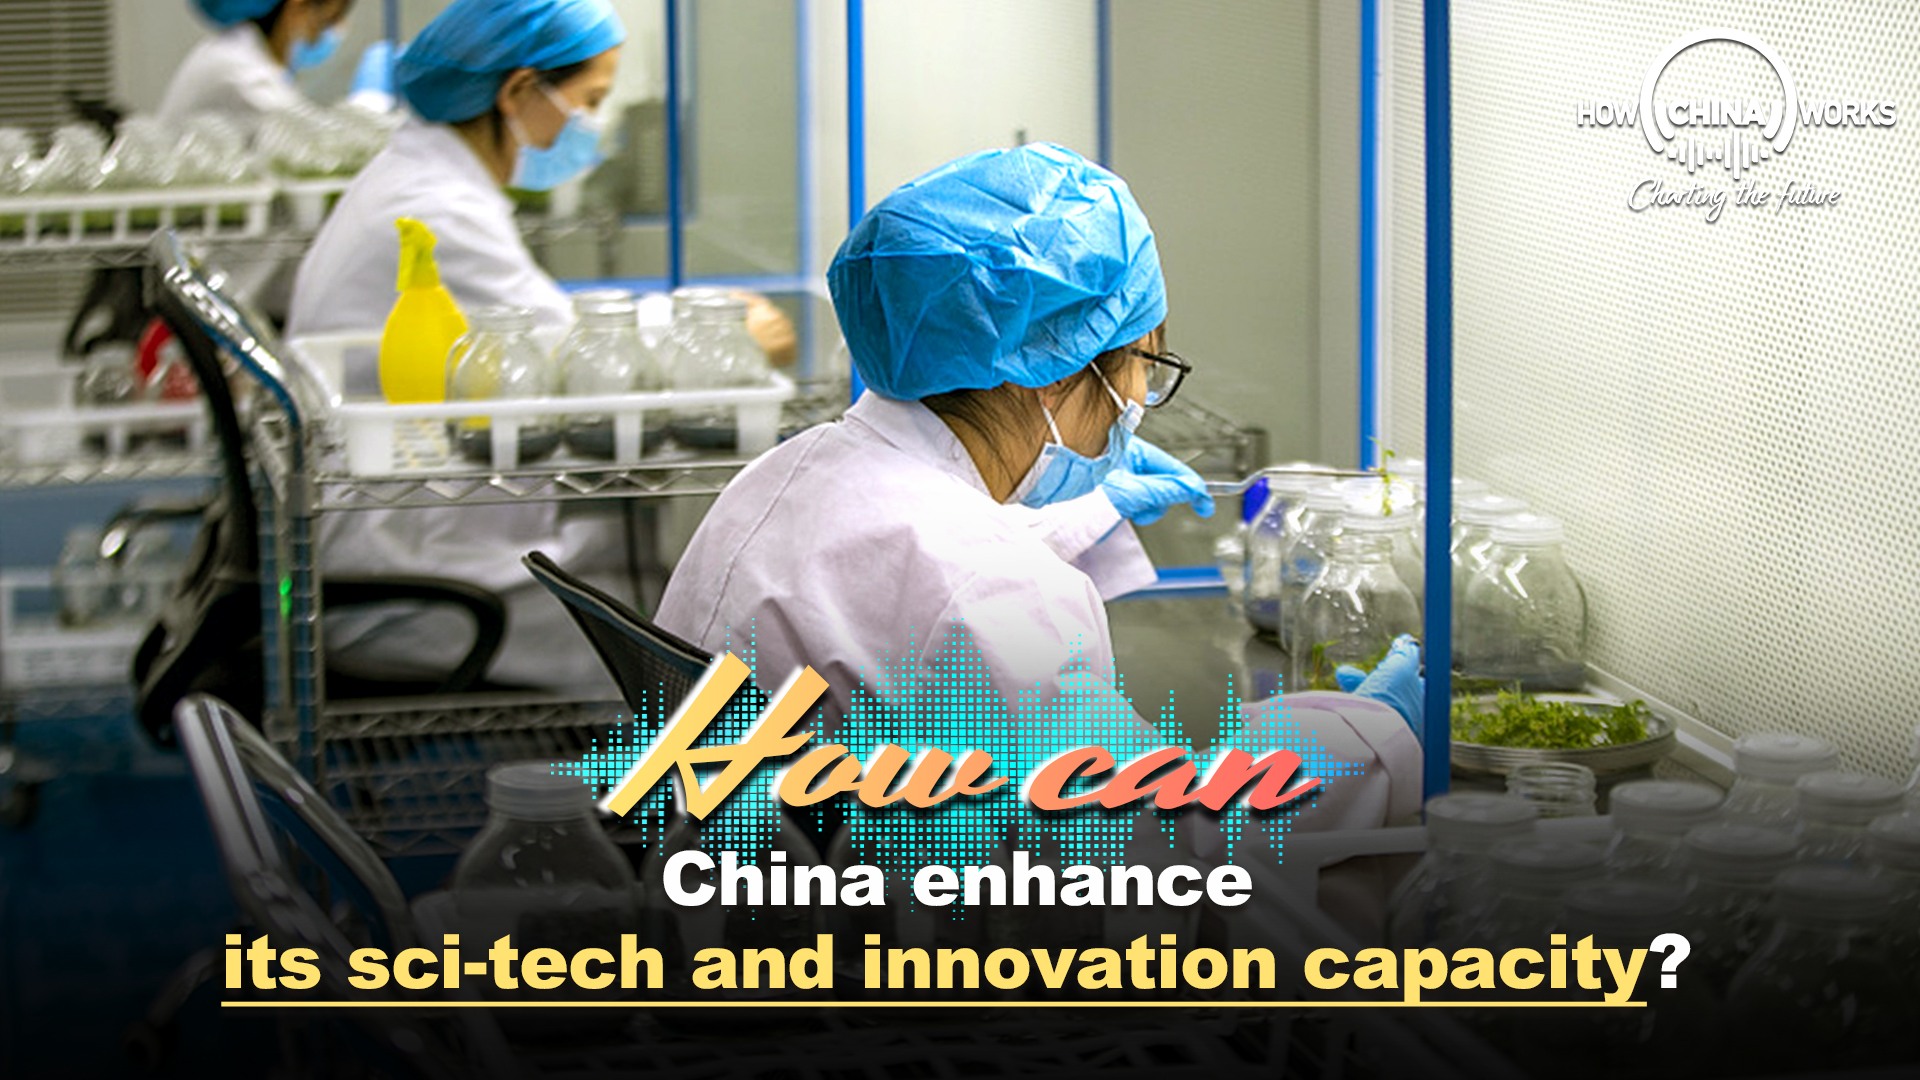 How can China enhance its sci-tech and innovation capacity?